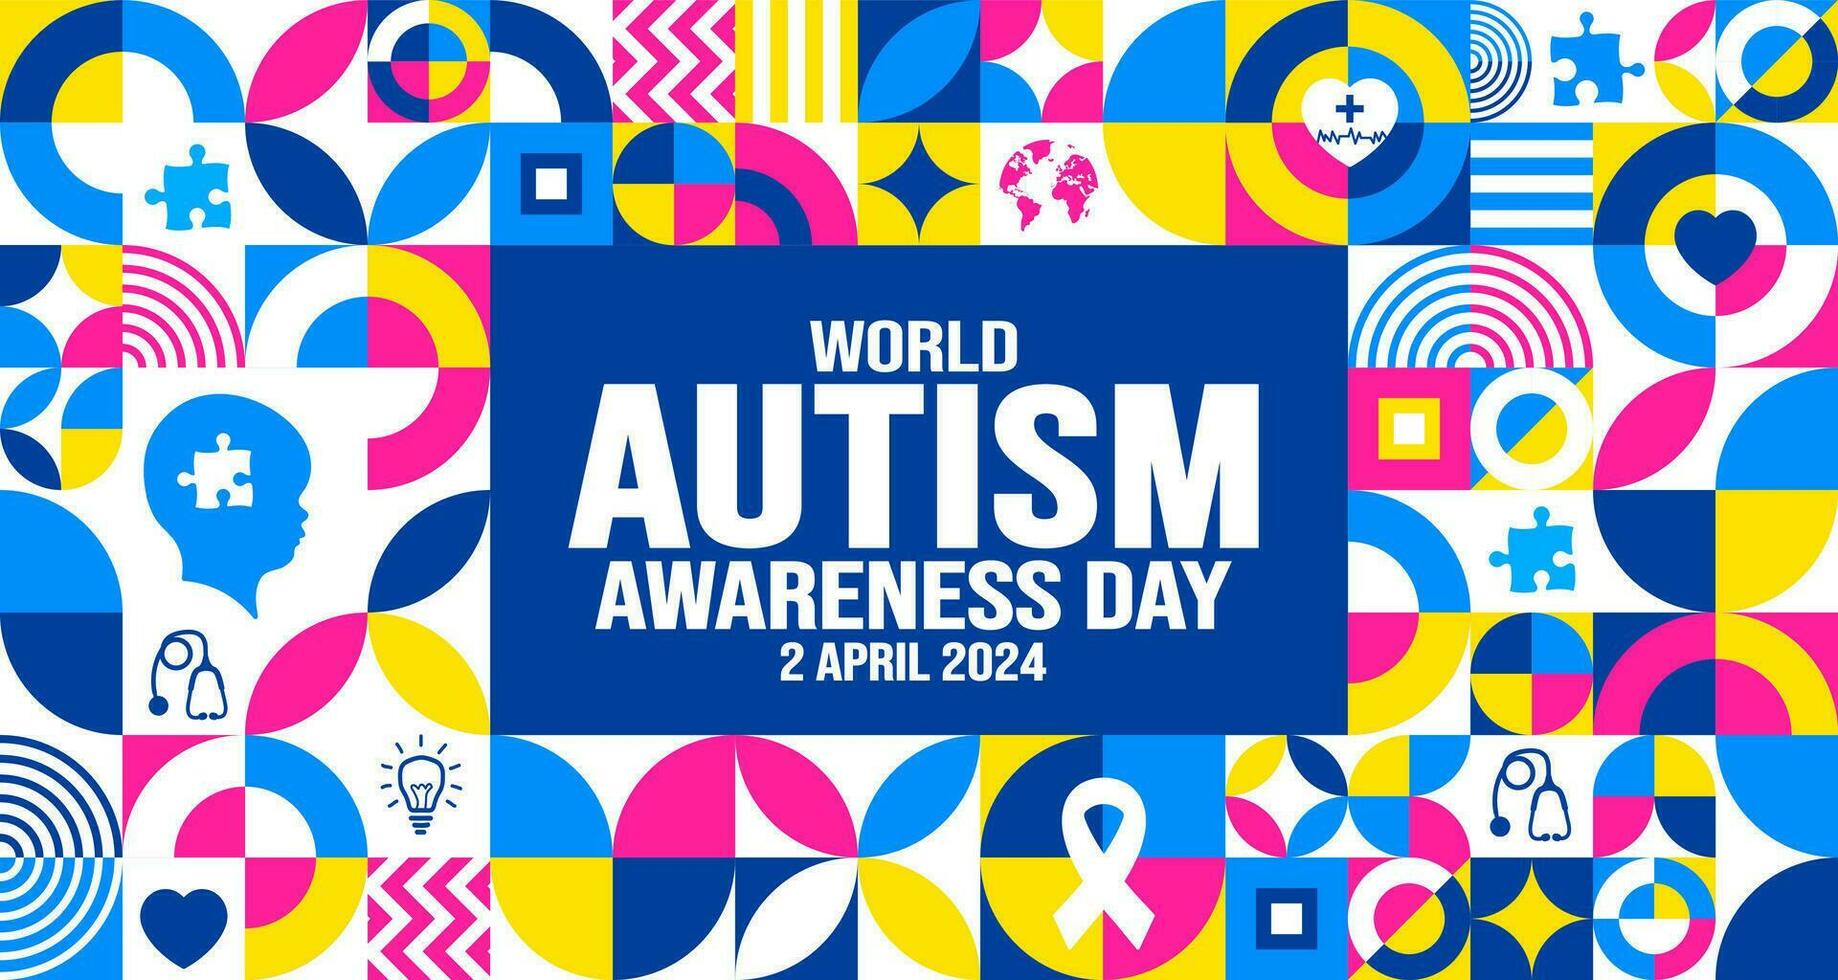 World autism awareness day Abstract Geometric minimalist simple shape and figure artwork  puzzle pieces pattern background template celebrated in 2 April. use to banner, greeting card, poster. vector